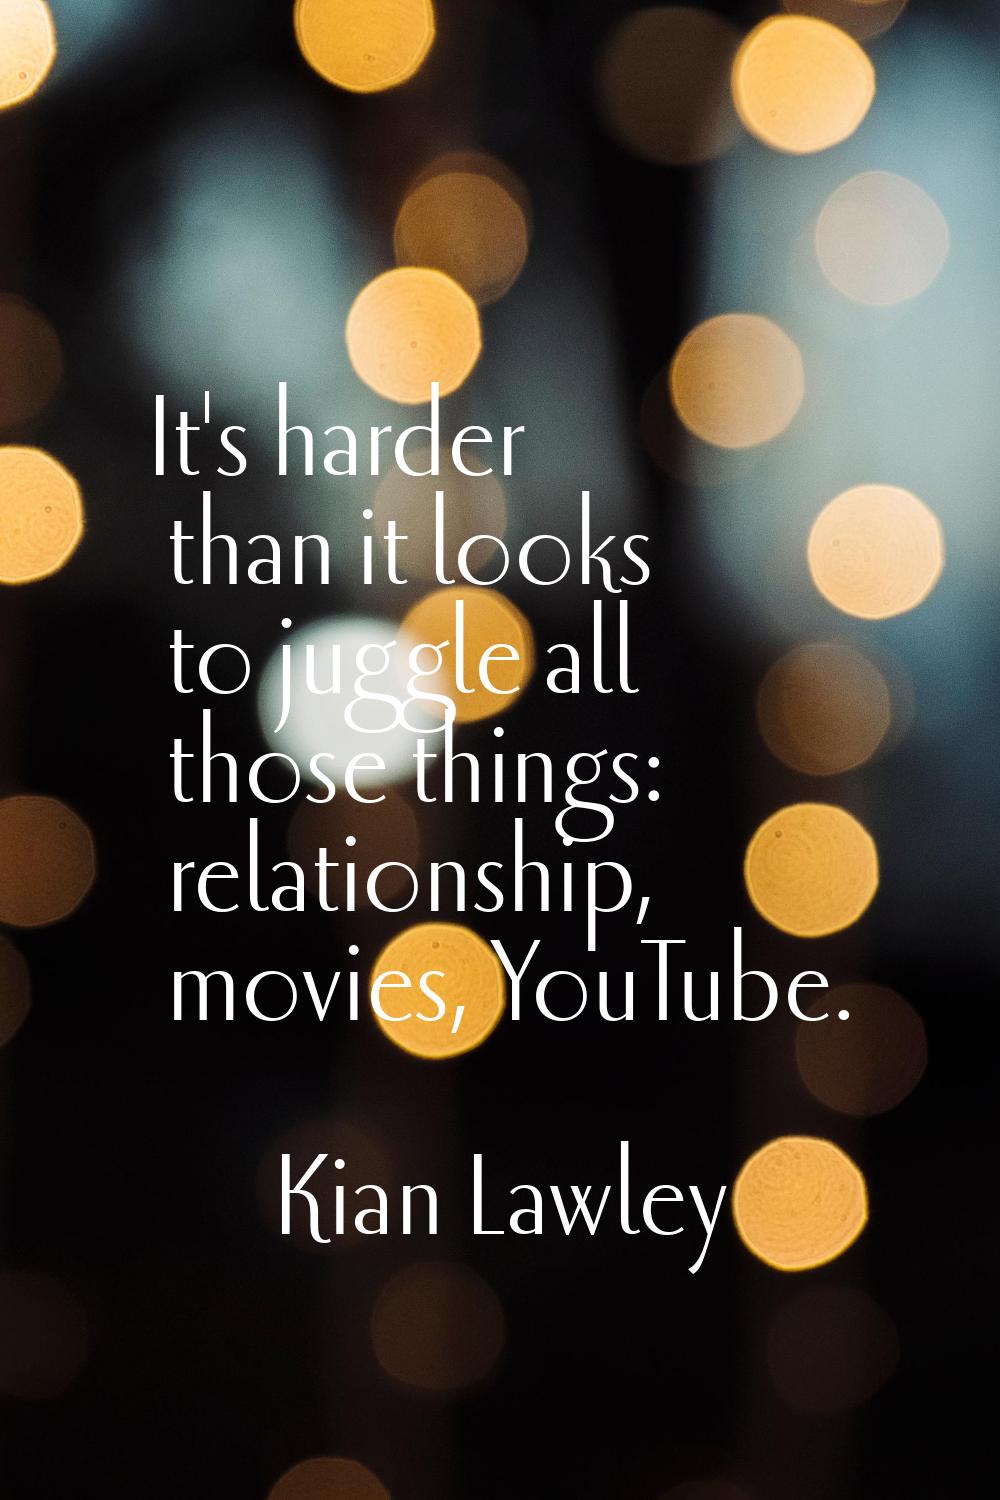 It's harder than it looks to juggle all those things: relationship, movies, YouTube.